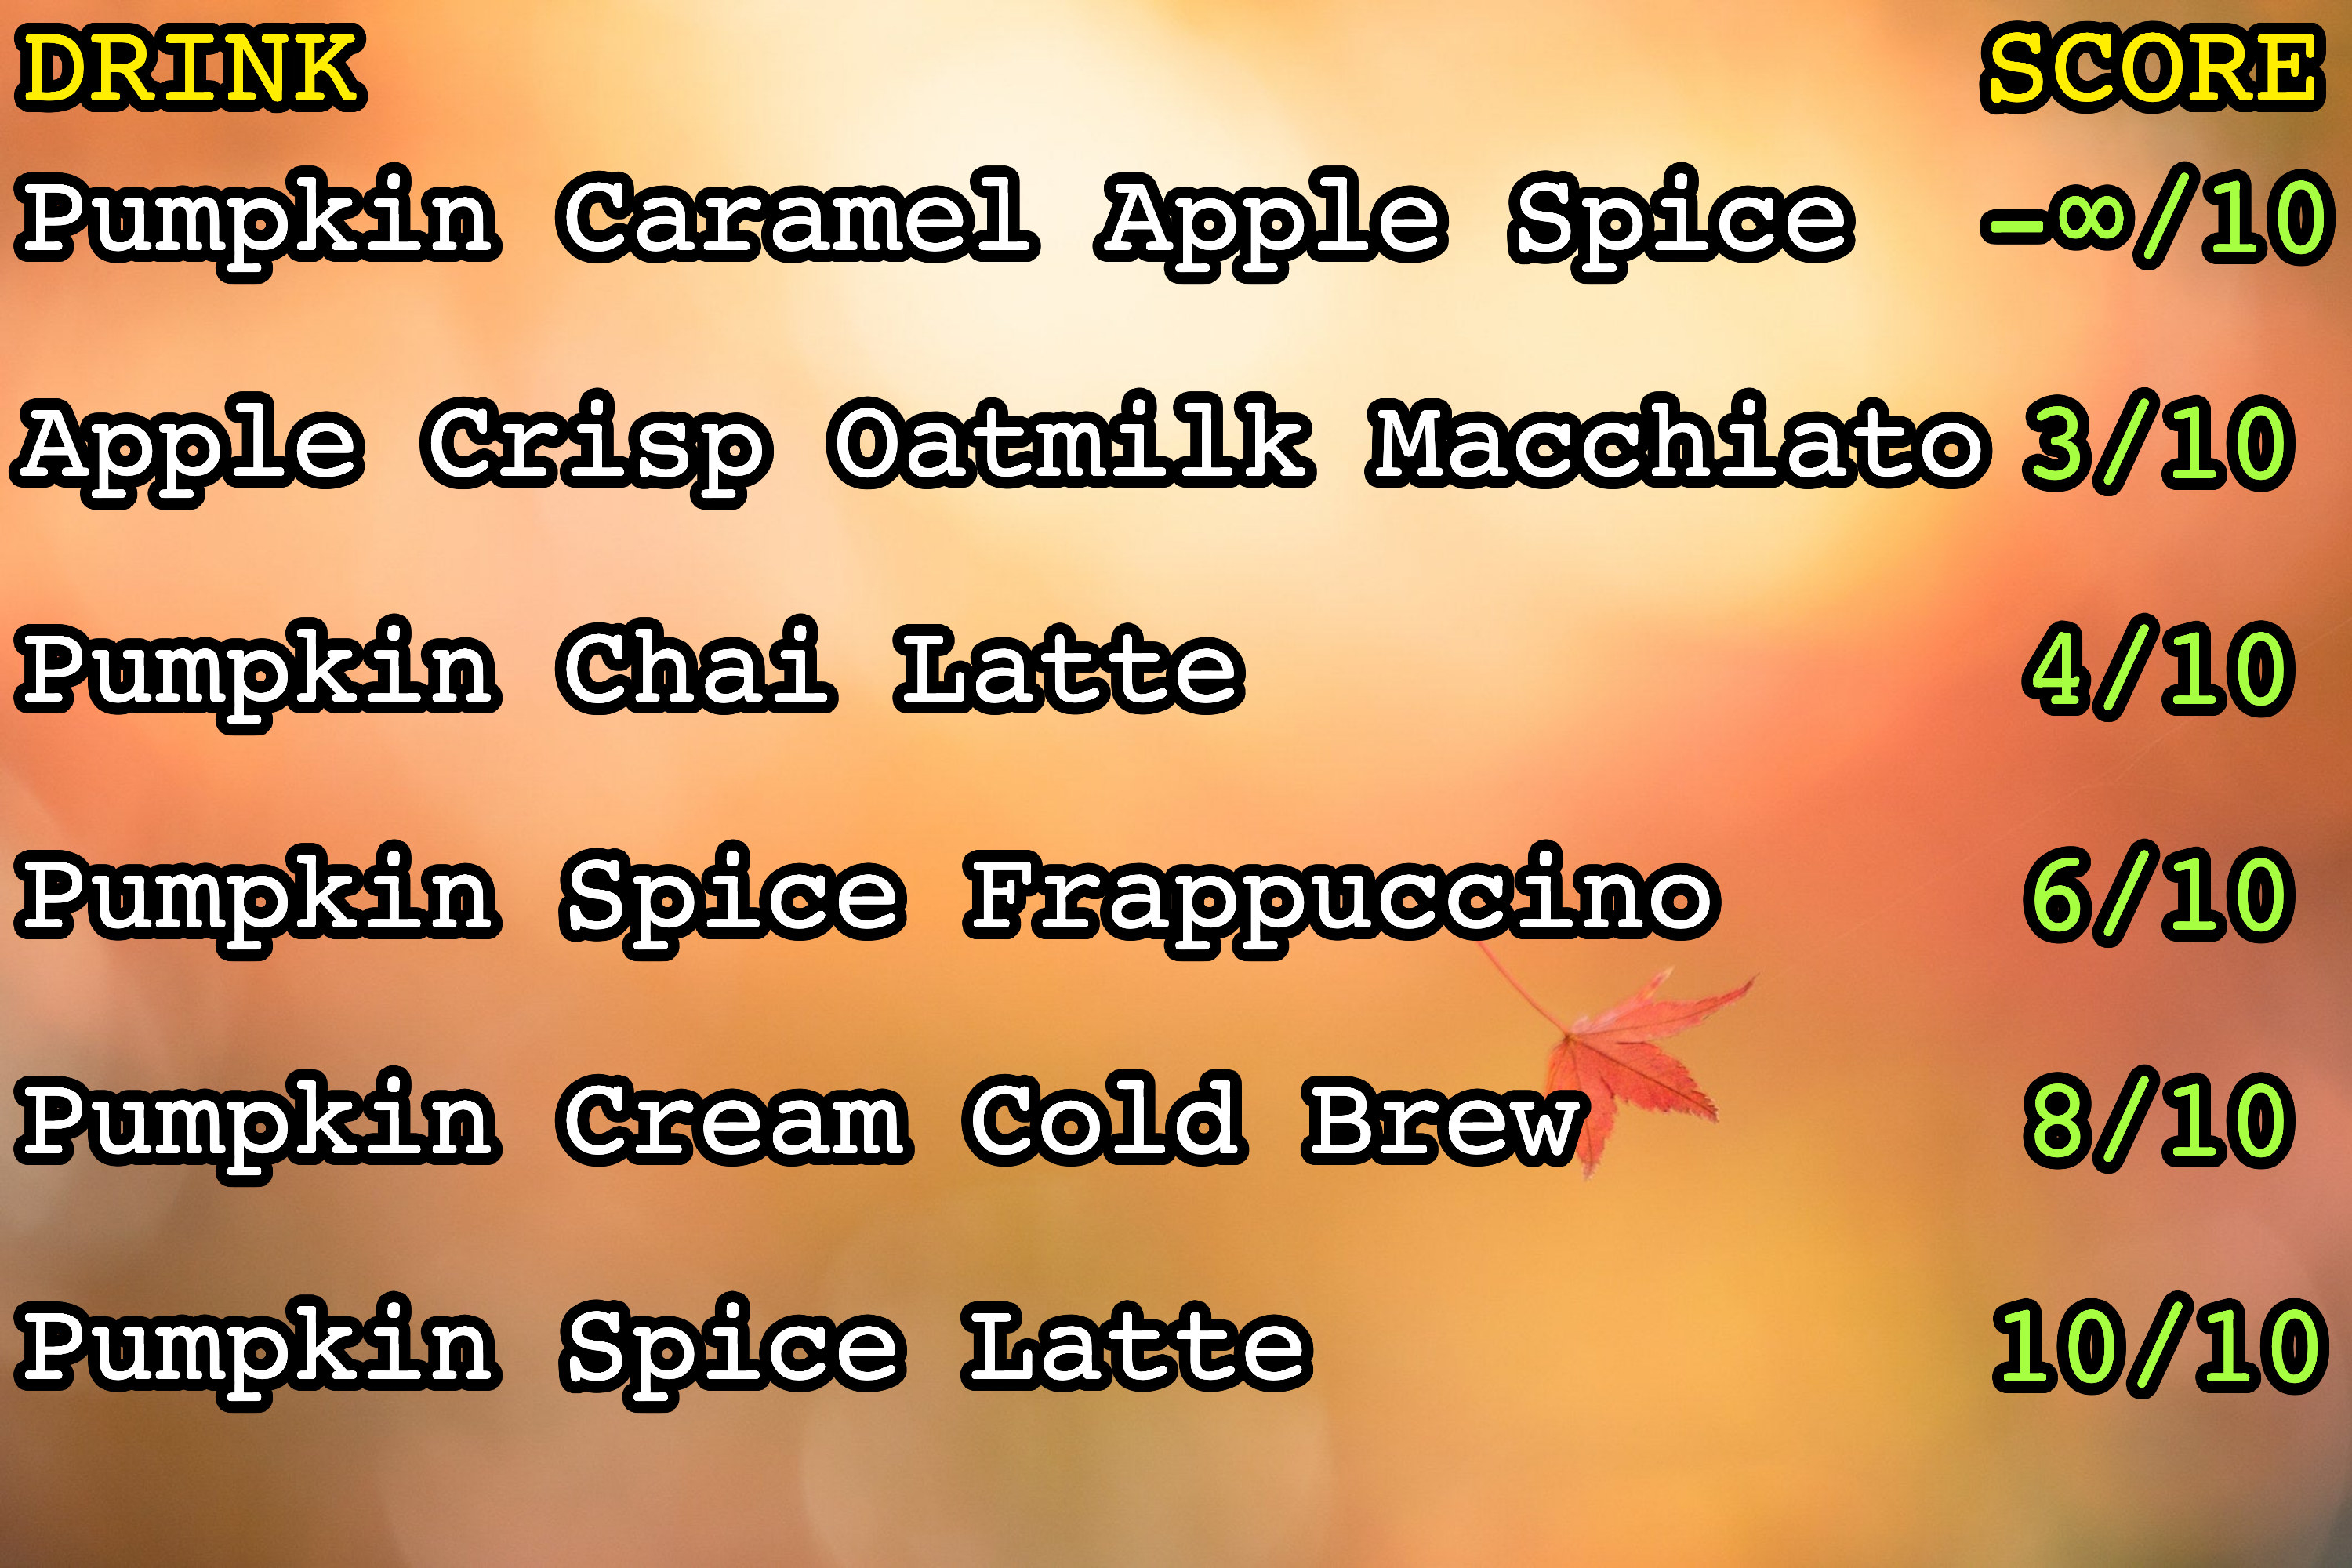 A full ranking of the drinks, with the Pumpkin Spice Latte in first and Pumpkin Caramel Apple Spice in last